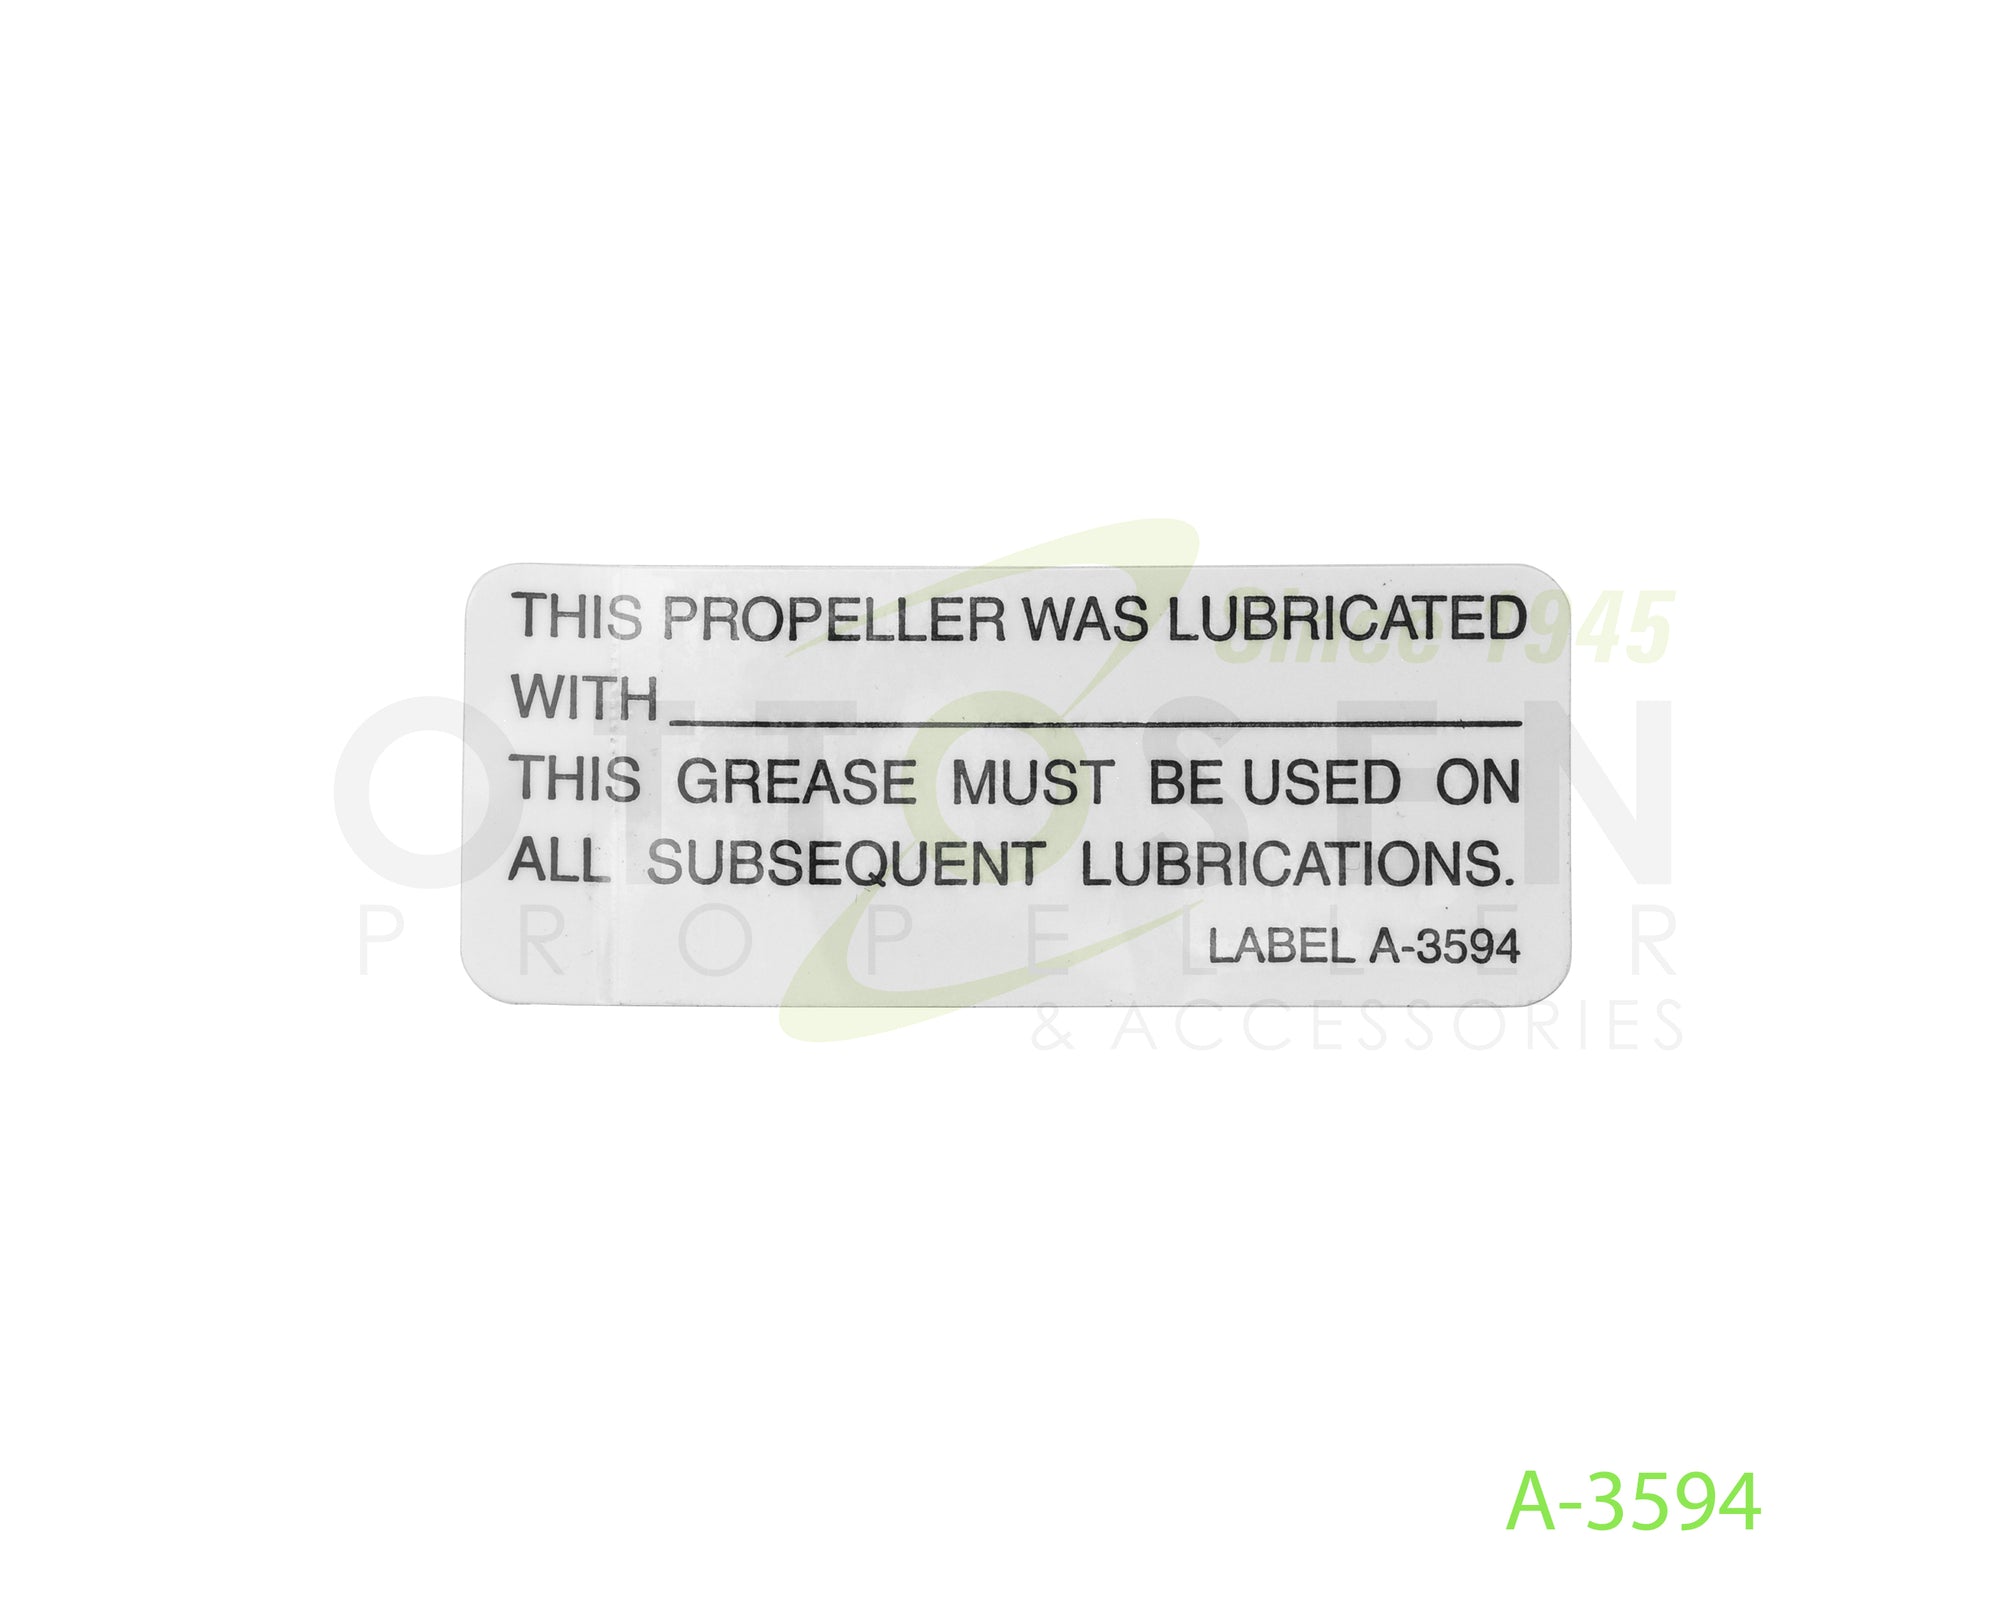 A-3594-HARTZELL-PROPELLER-CYLINDER-LUBRICATION-DECAL-PICTURE-1